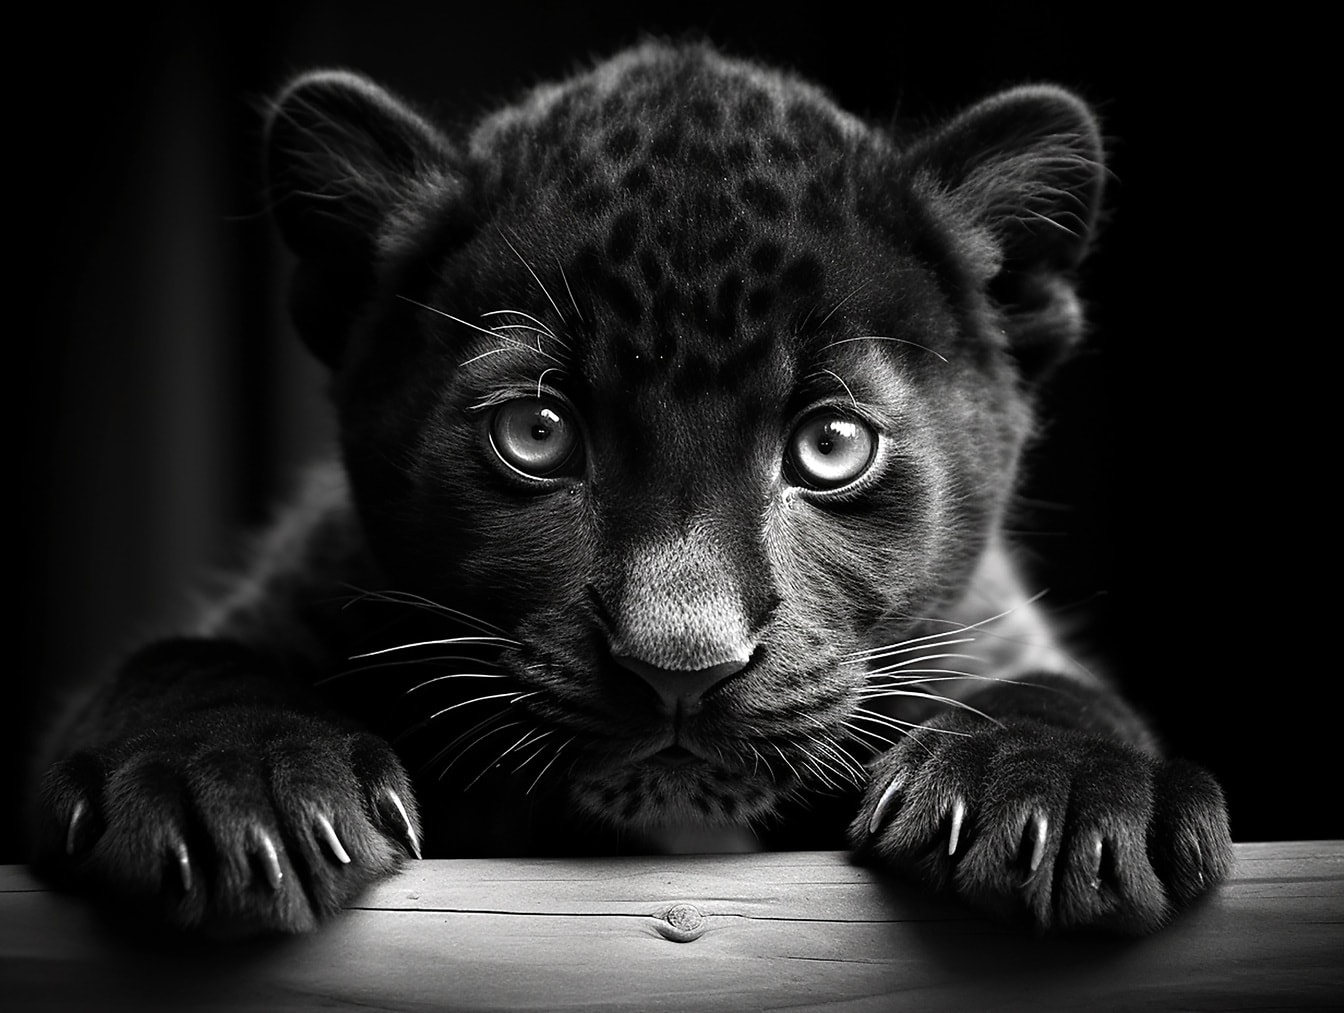 Monochrome portrait of adorable young black panther